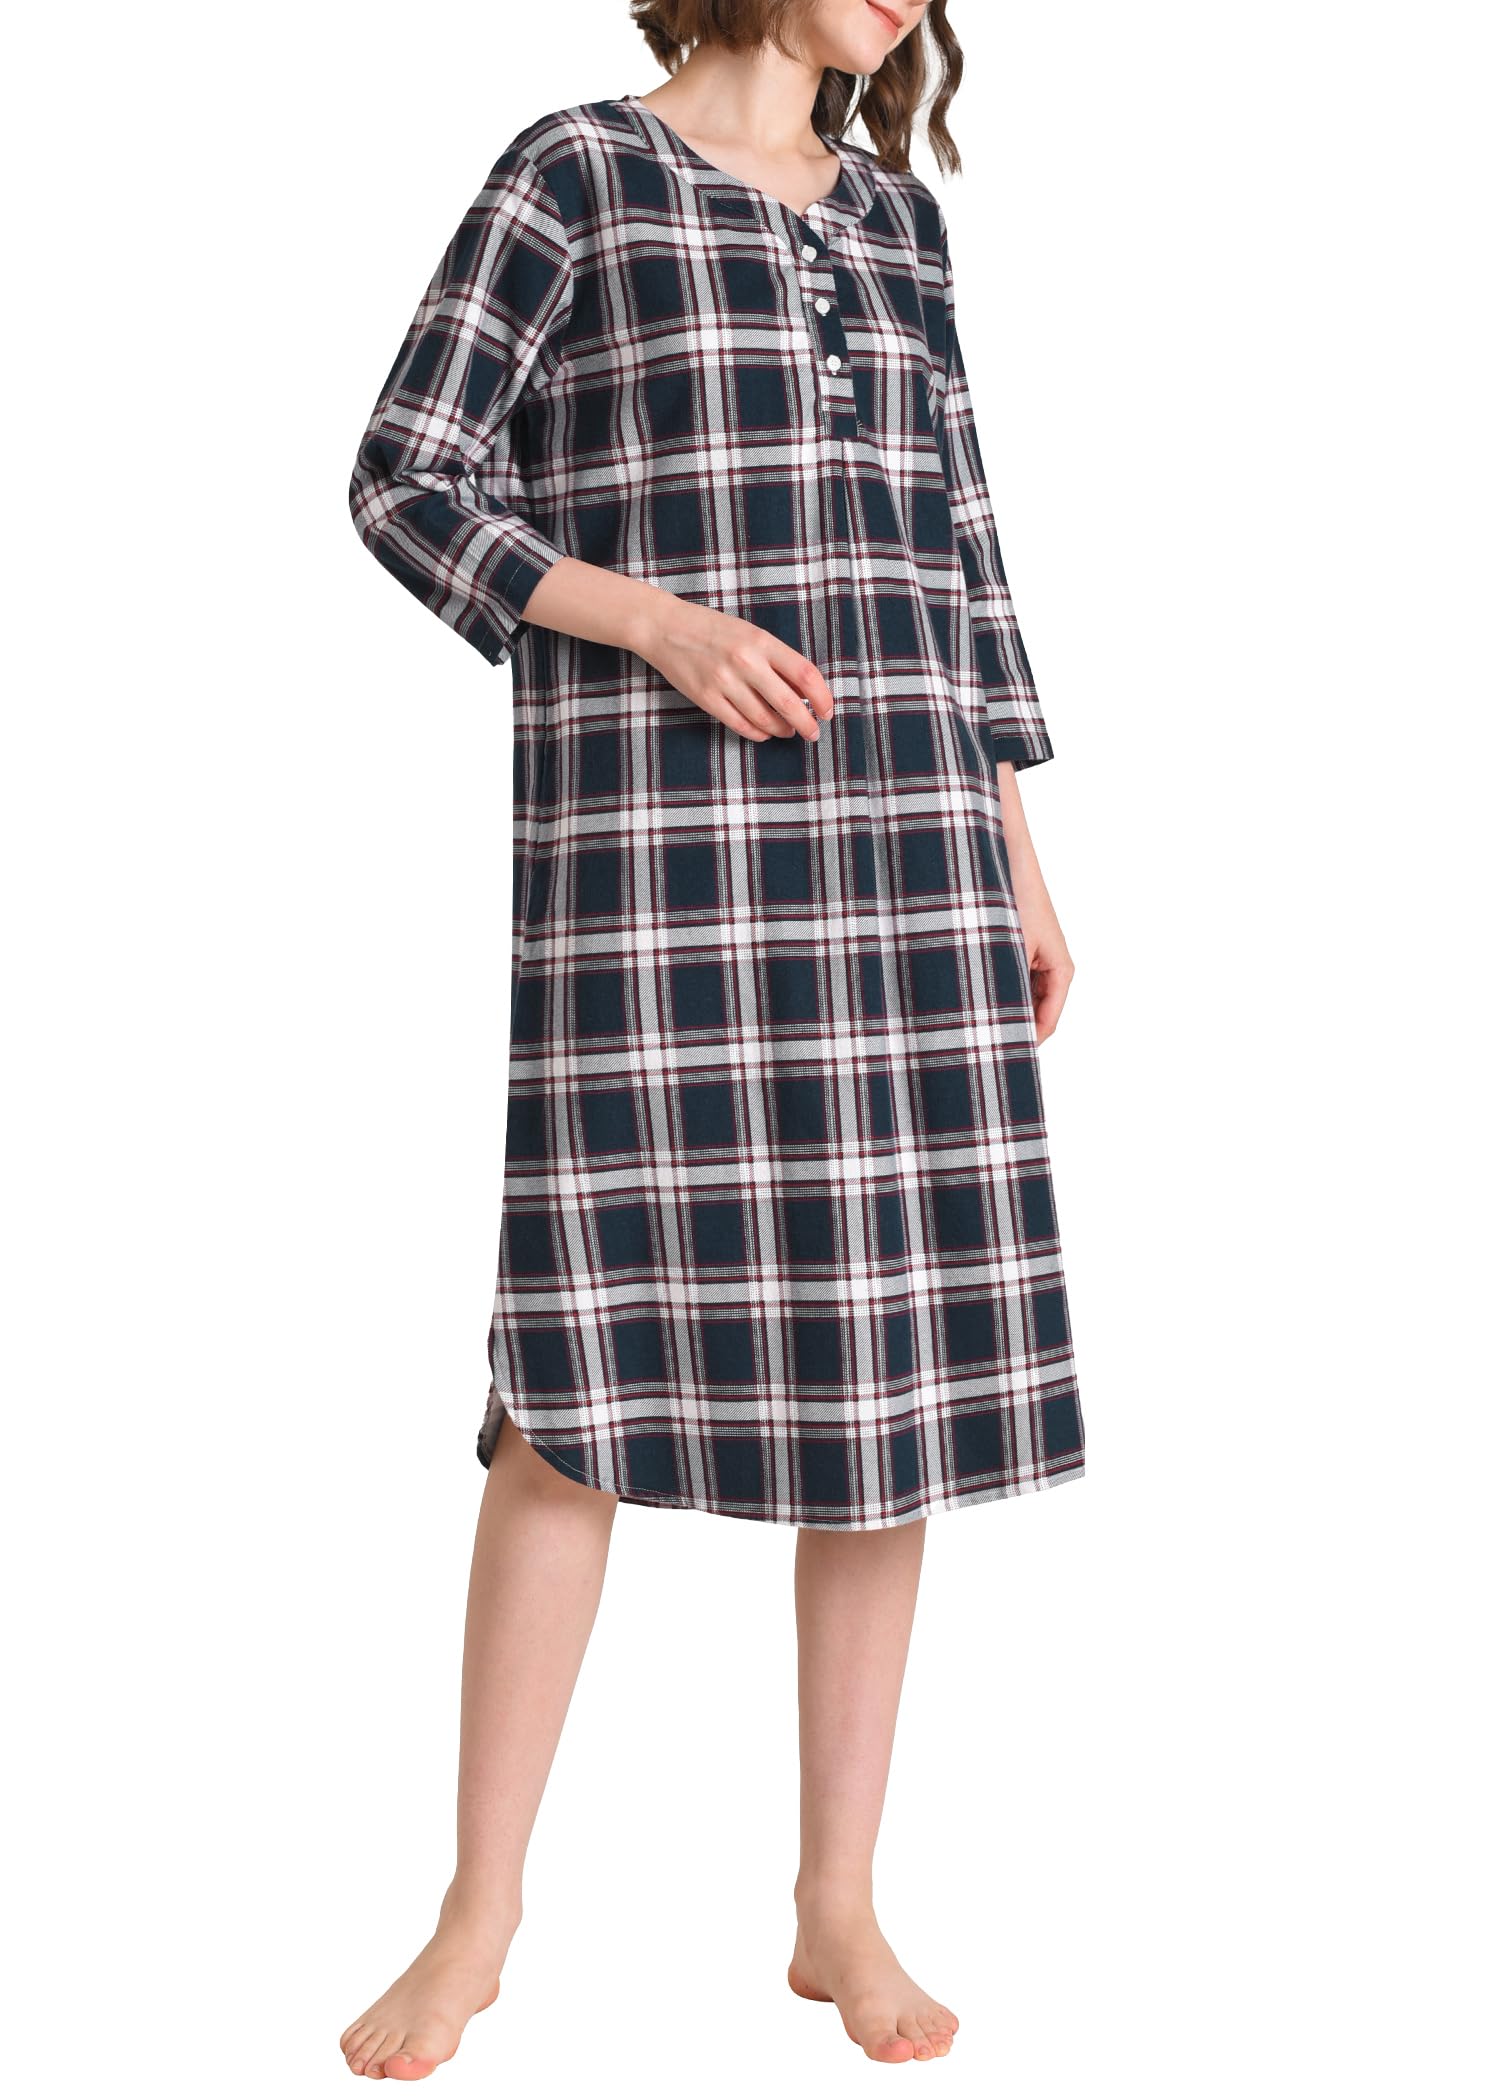 Women's Cotton Flannel Nightgown Plaid Long Nightshirt with Pockets - Latuza